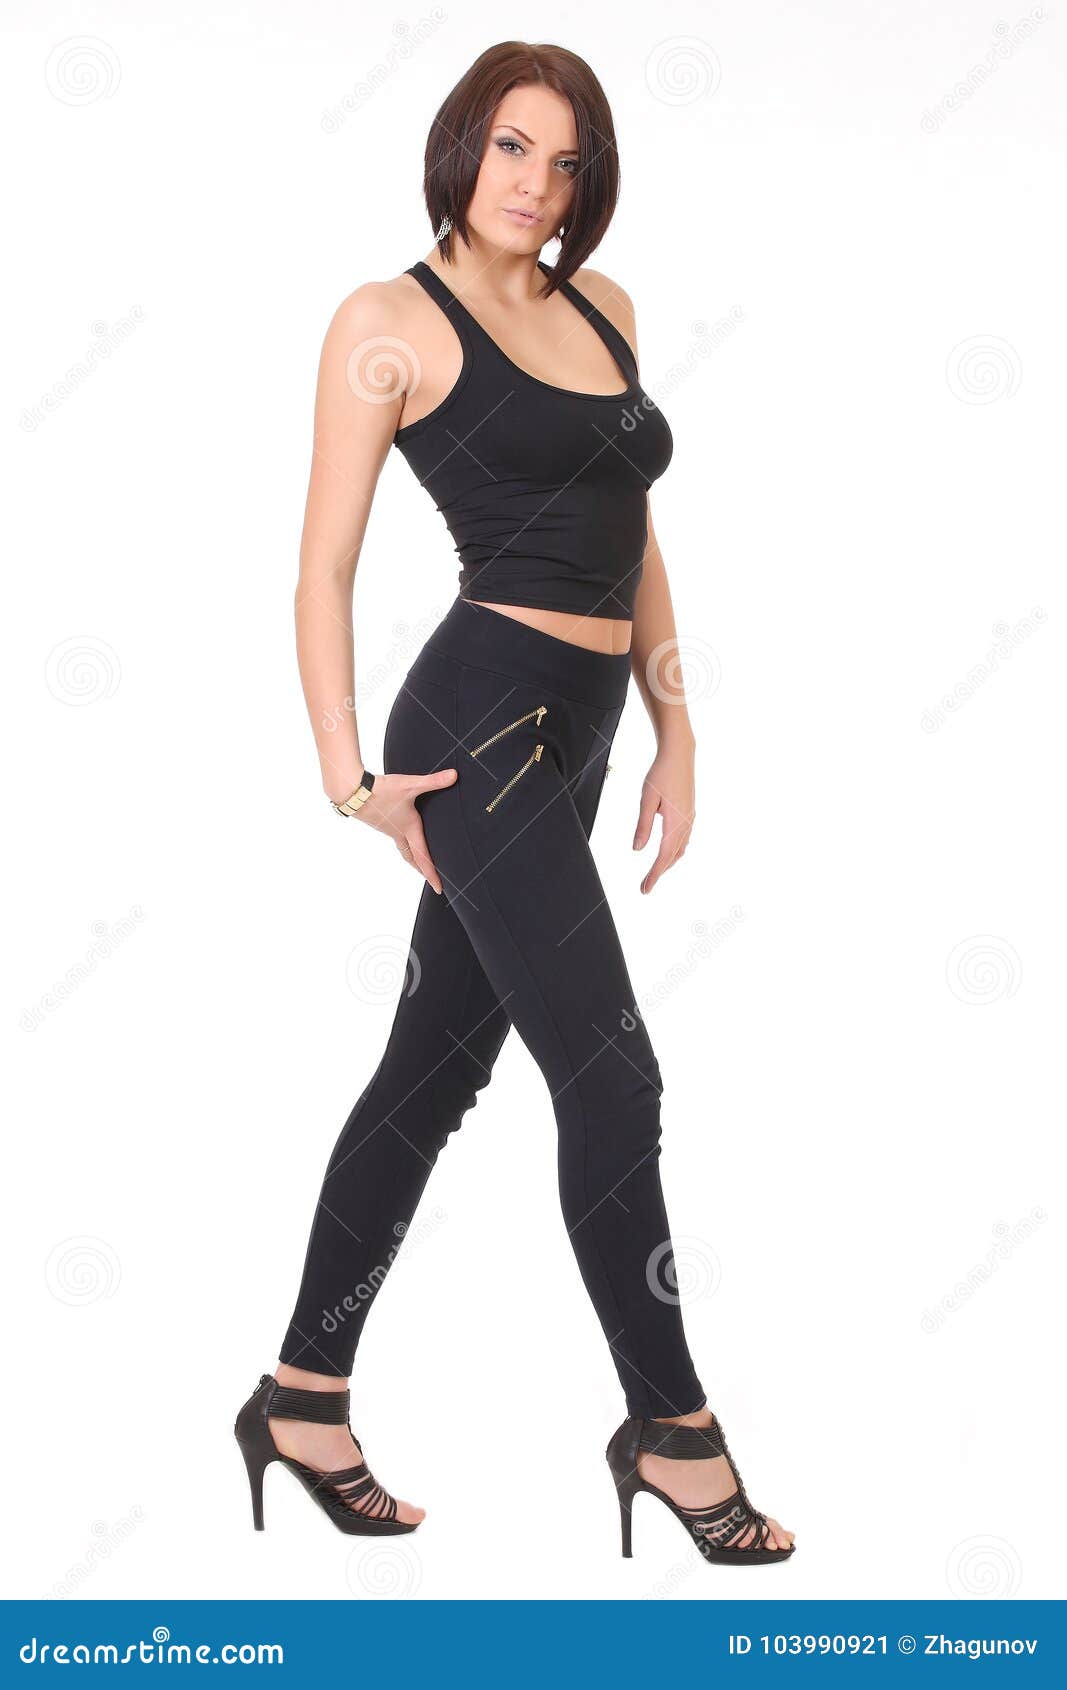 Beautiful Woman in a Black Tight Dress Stock Image - Image of goodly ...